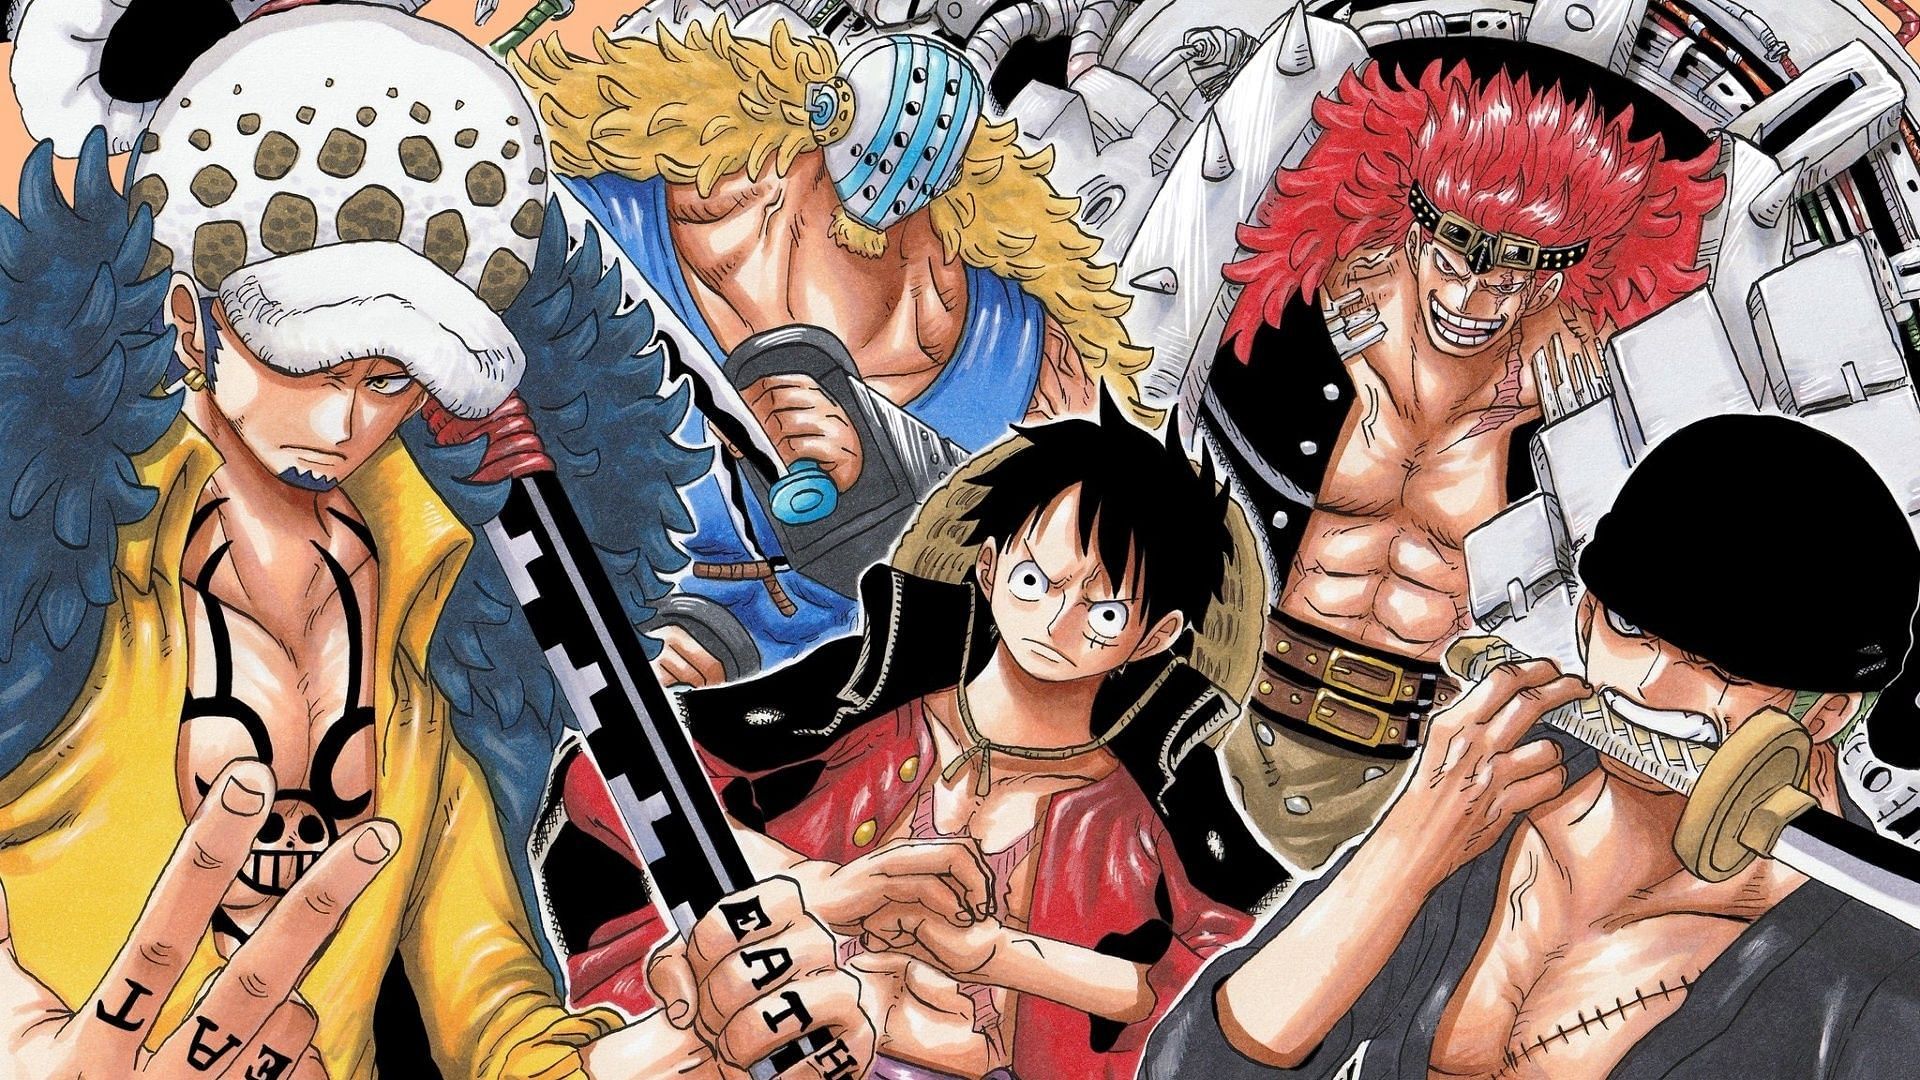 Law, Luffy, Zoro, Kid and Killer, the five strongest Supernovas who challenged the Emperors during the Rooftop battle (Image via Eiichiro Oda/Shueisha/Toei Animation, One Piece)